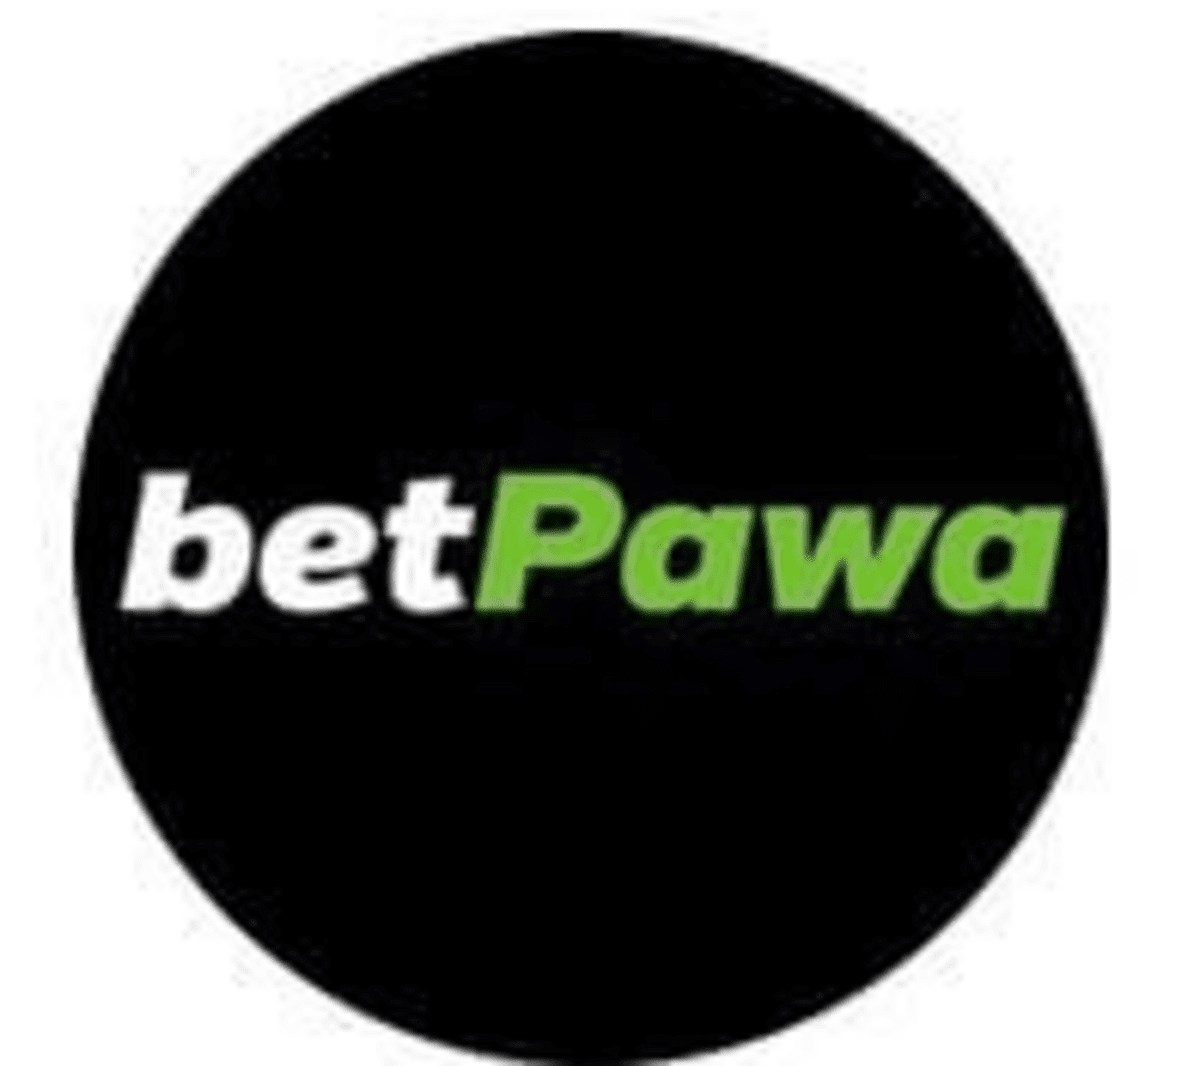 BetPawa APP APK for Android Free Download, betpawa app apk download tz, bet pawa app download, betpawa apk latest version, bet apk download, betpawa app login, betpawa app download for iphone